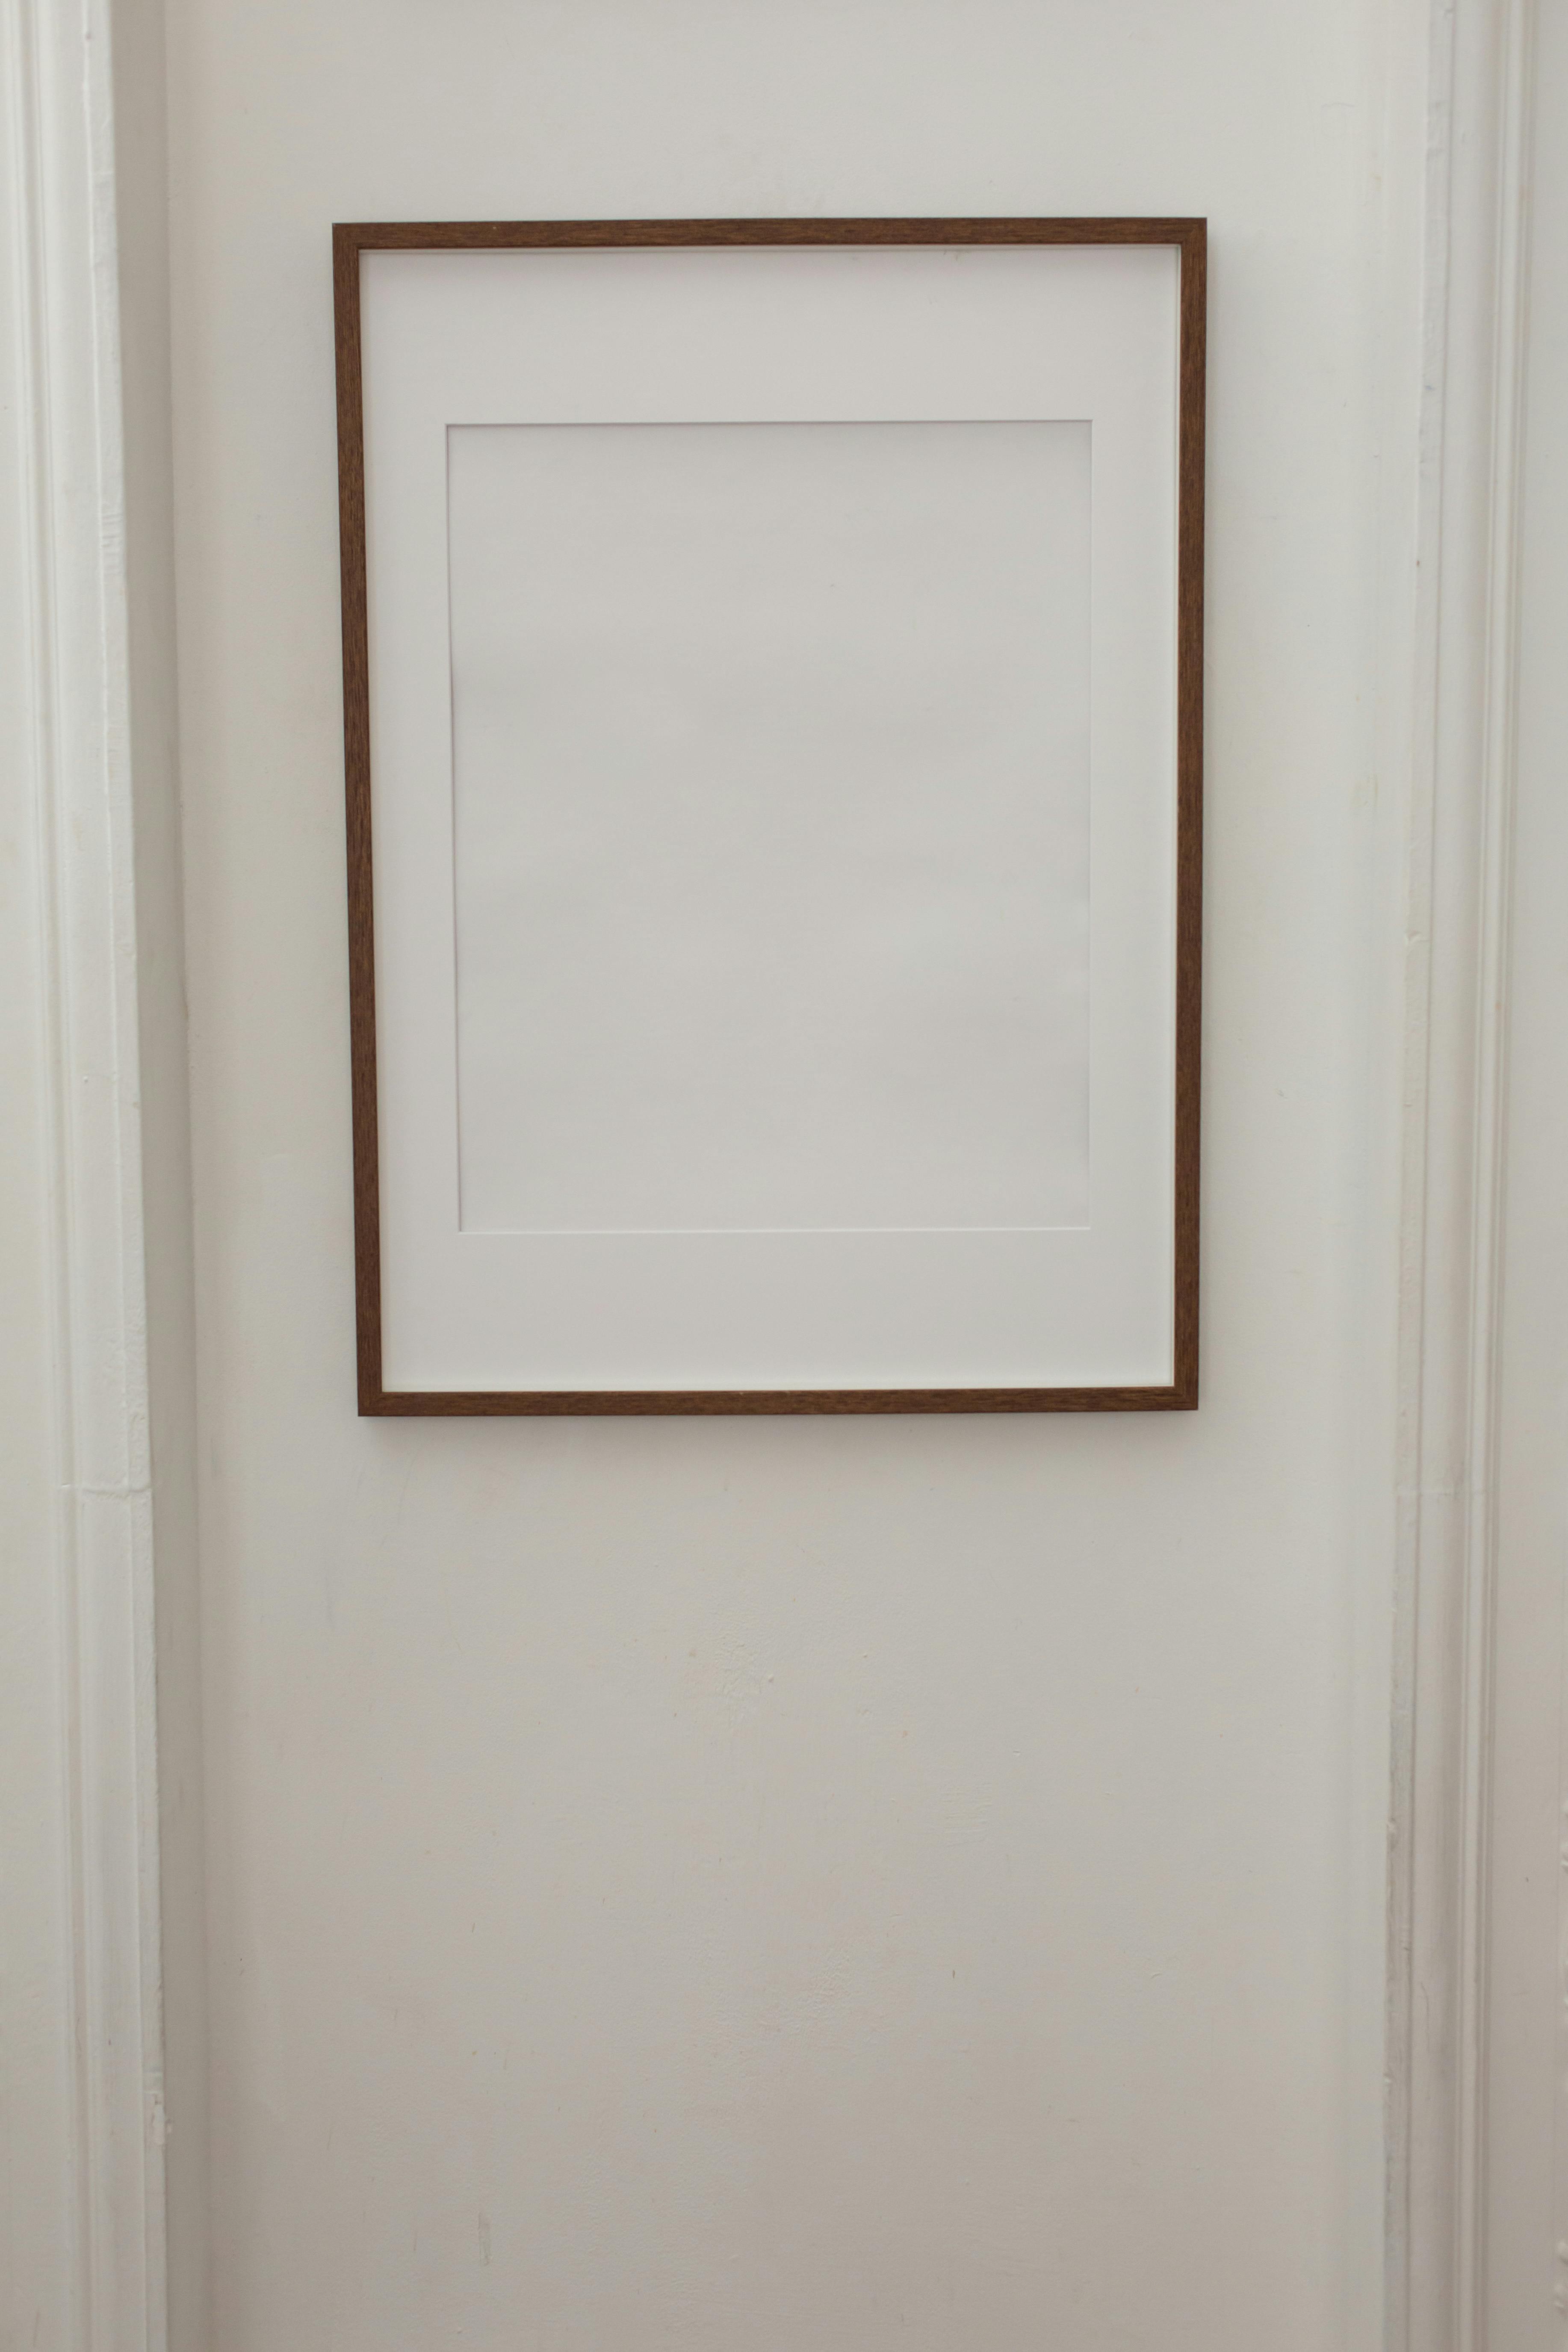 blank simple frame hanging on white wall of apartment